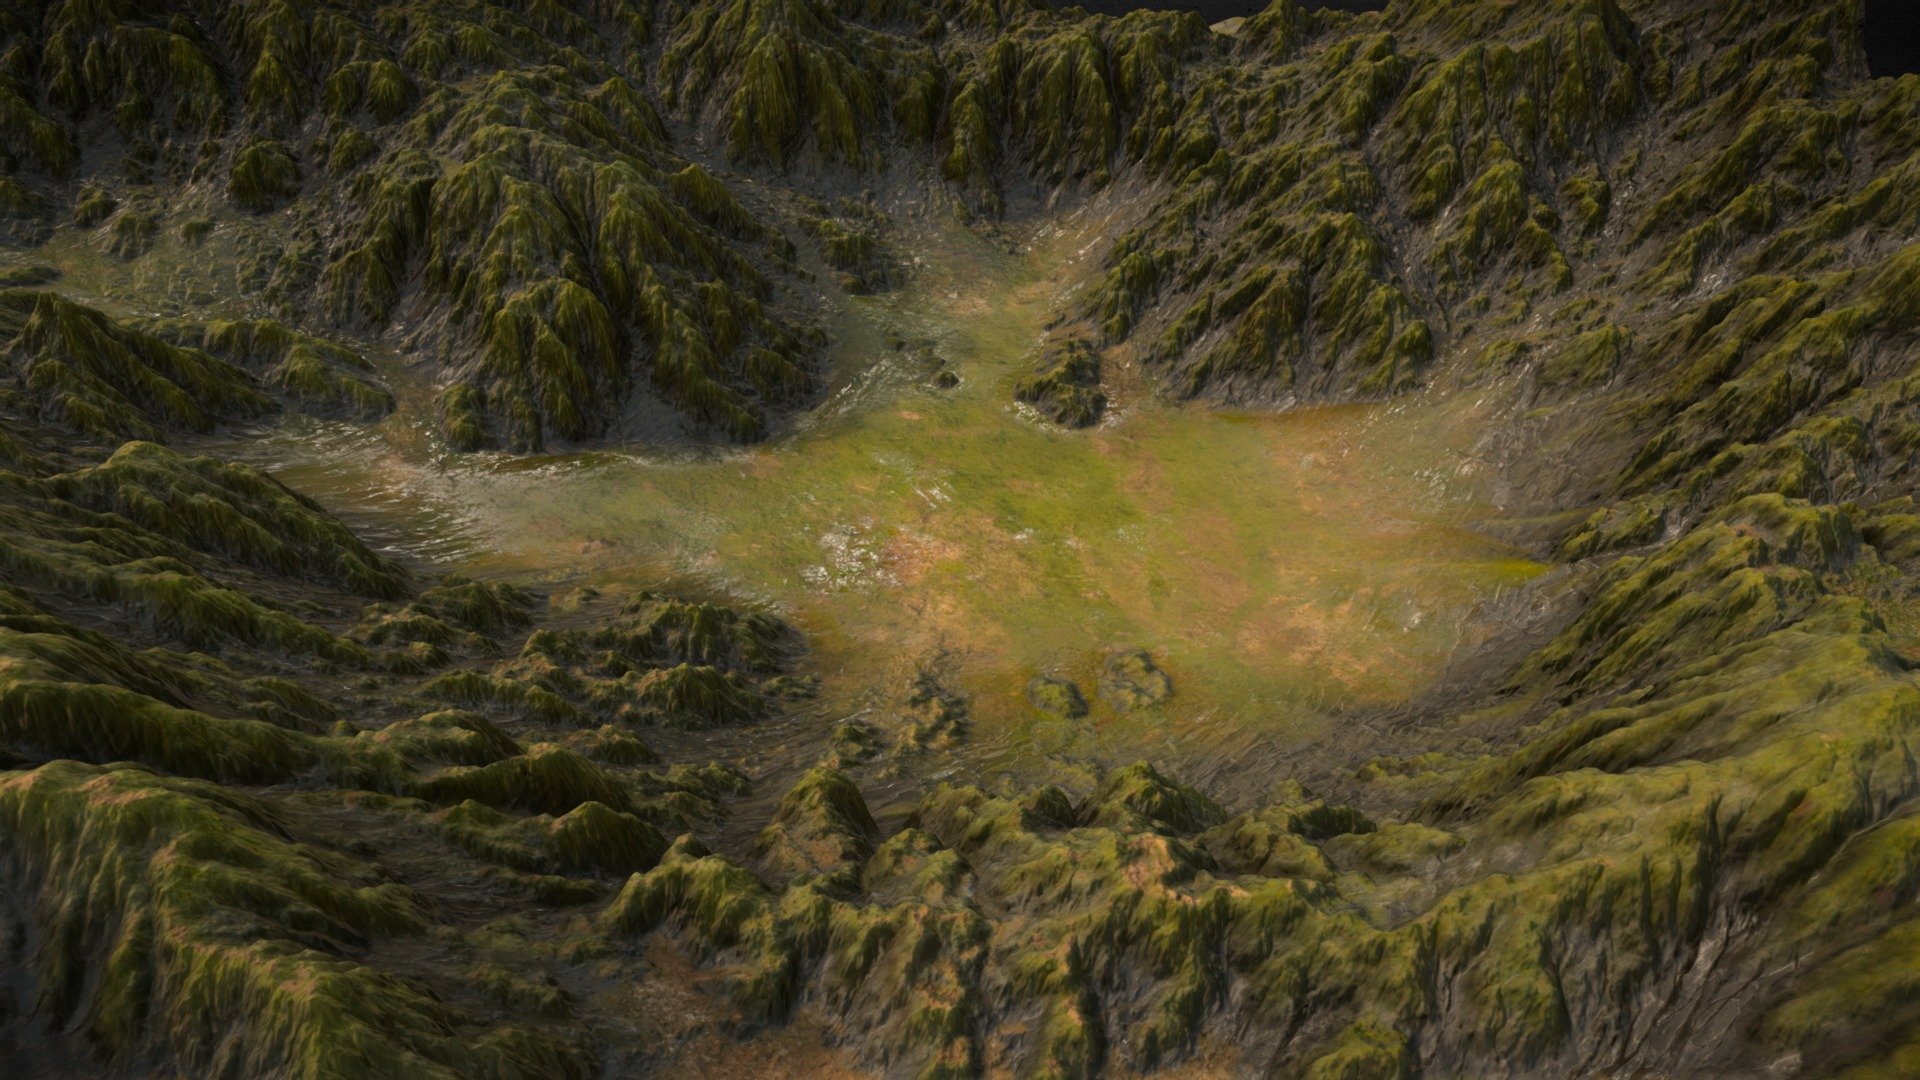 Compact Valley Landscape with 4k Textures and Heightmap.You can use it in game to generate Landscape using HeightMap.
The HeightMap is include in the Additional files.The details of additional files are as follows:it includes high to low resolution obj mesh with all the textures map.i.e:Albedo,Roughness,Normal,Height with some mask for game engines like unity/UnrealEngine4/5. Thank You!

Note:Download the Additional Files to get all the Textures along wih masks and Heightmap - Compact Valley Landscape - Buy Royalty Free 3D model by Nicholas-3D (@Nicholas01) 3d model